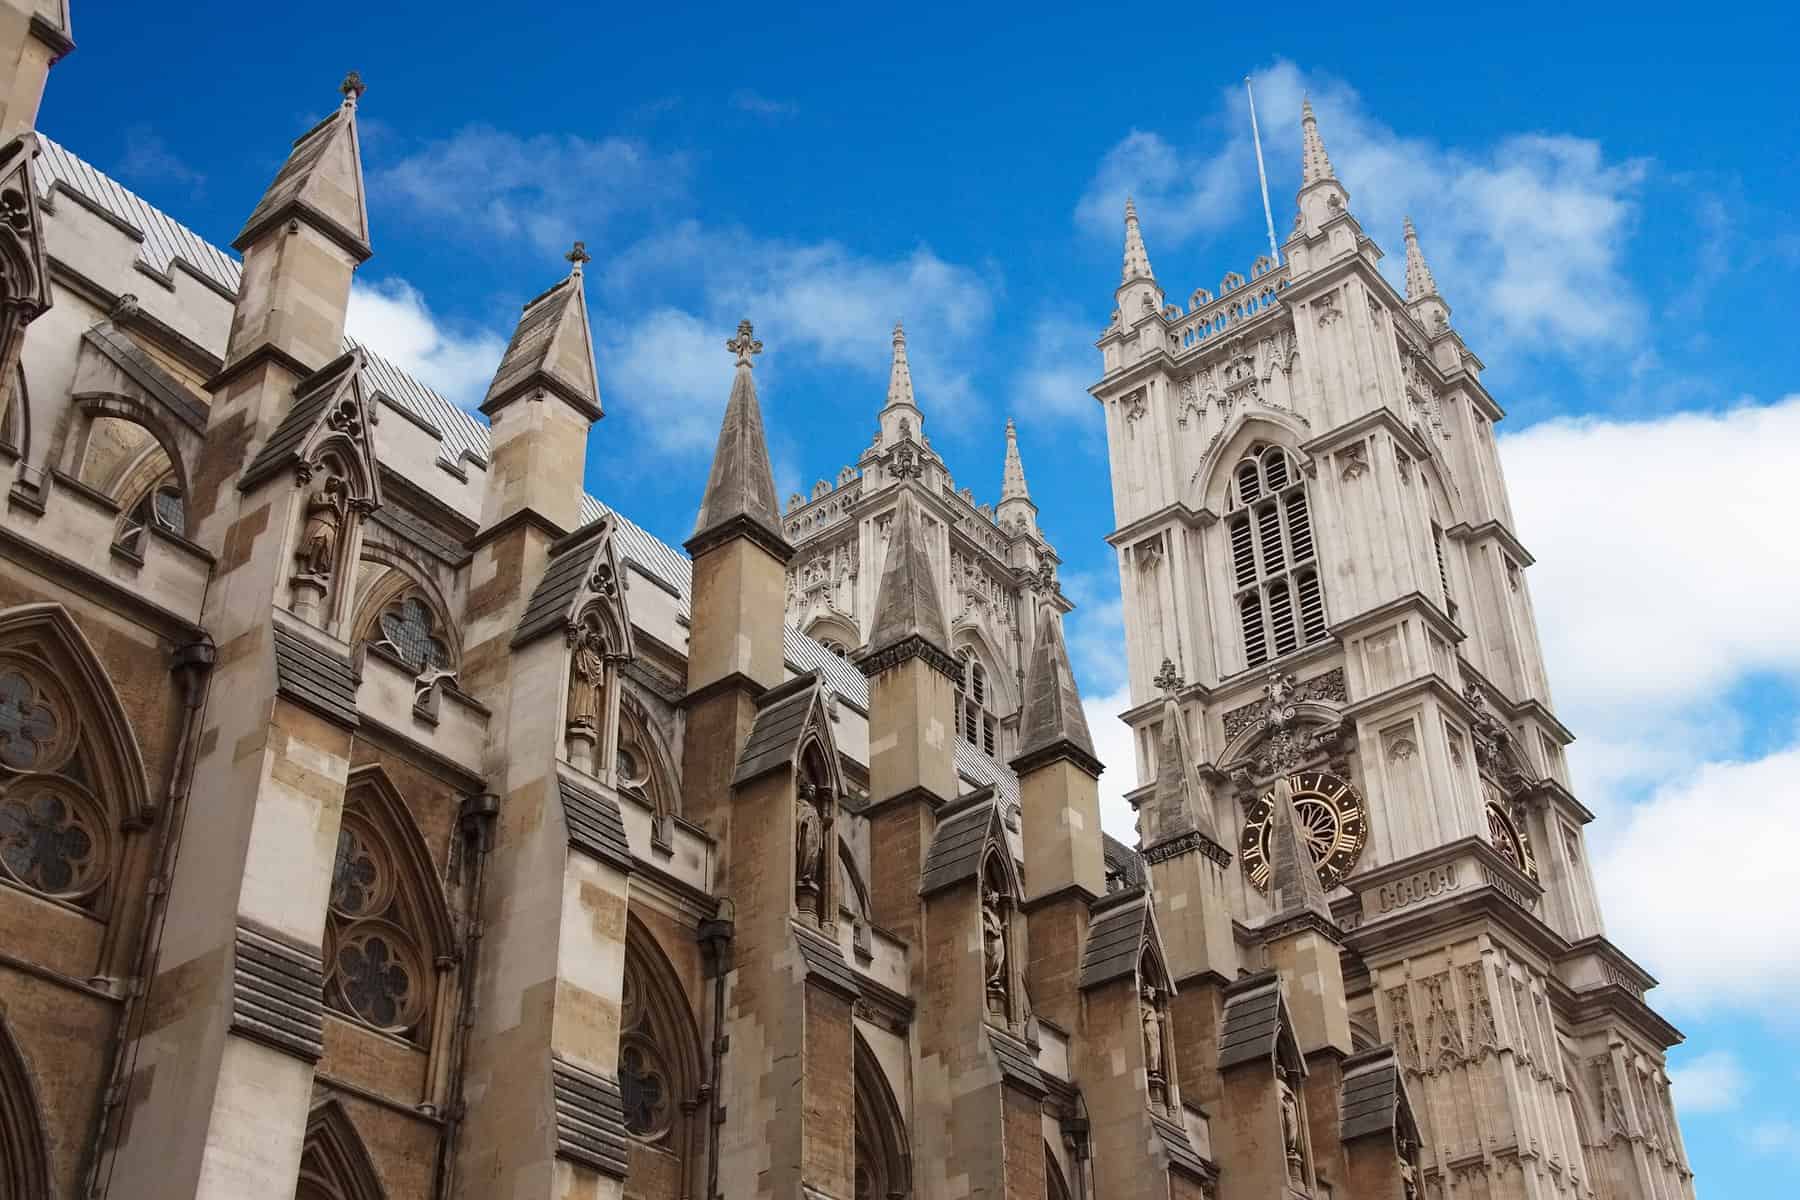 The upper portion of Westminster Abbey, including tower, is seen from the street below.